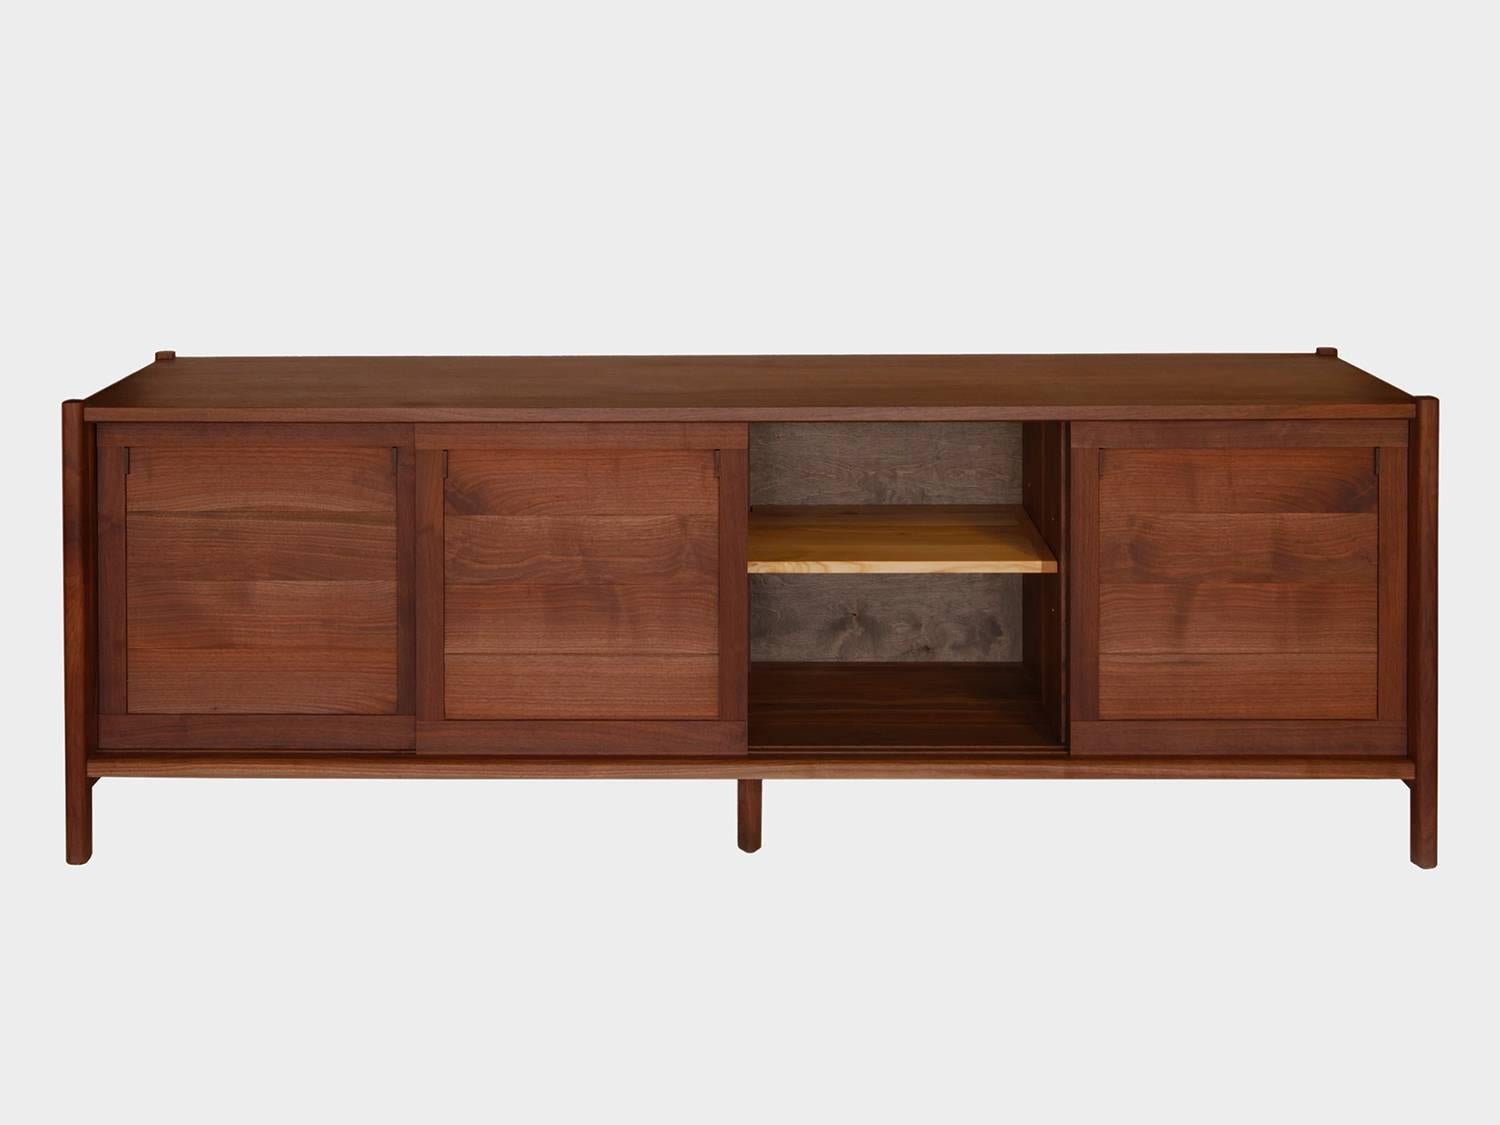 New York Heartwoods' contemporary black walnut credenza is influenced by Mid-Century Modern design and fabricated from solid wood, save the ebonized FSC plywood paneled back. Each cabinet has great storage capacity and is comprised of four artfully